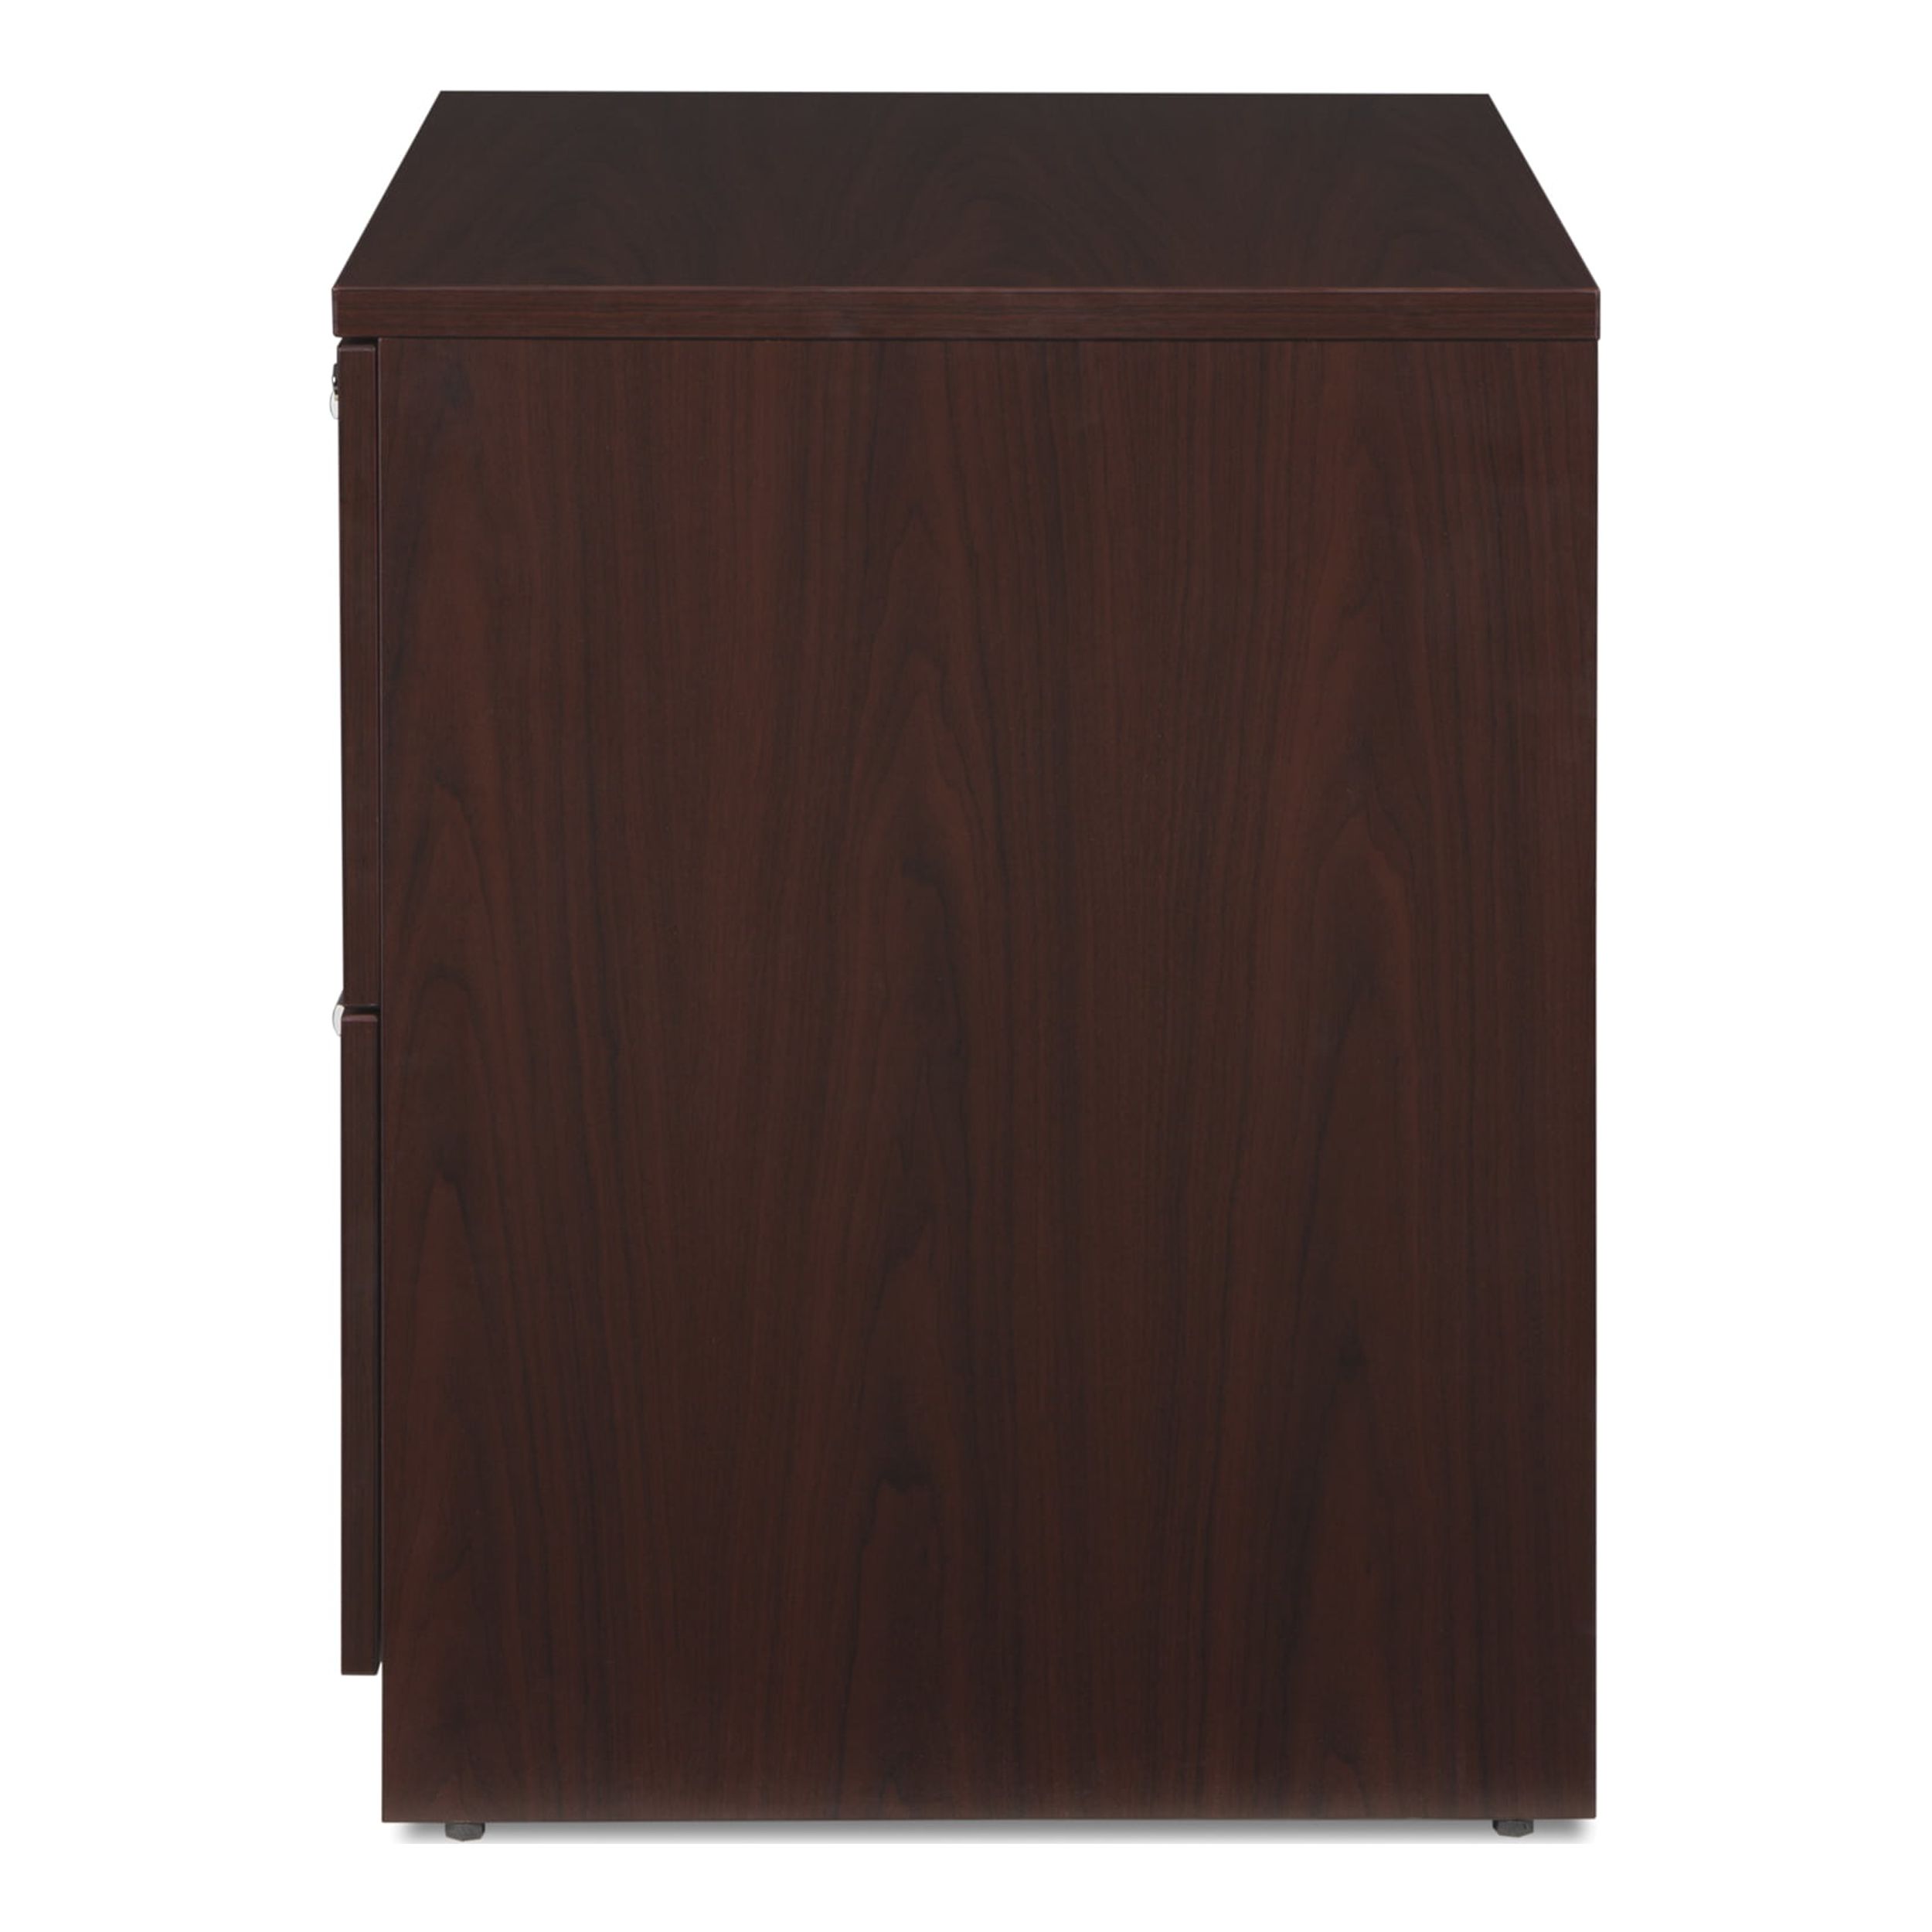 OFM Fulcrum Series Locking Lateral File Cabinet, 2-Drawer Filing Cabinet, Mahogany (CL-L36W-MHG) - image 4 of 9